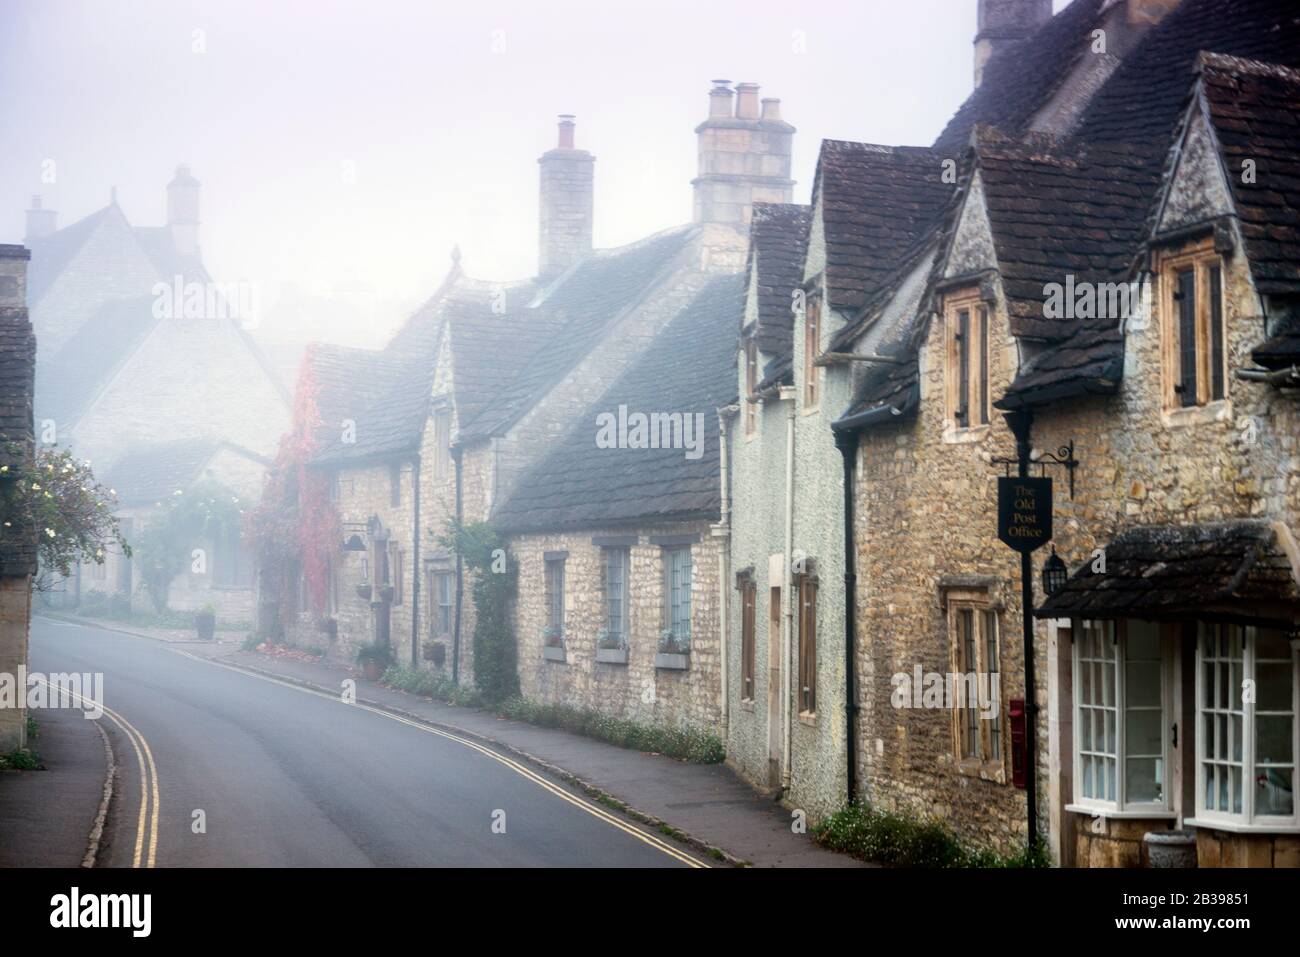 Castle Combe, England mittelalterliches Cotswold-Dorf. Stockfoto